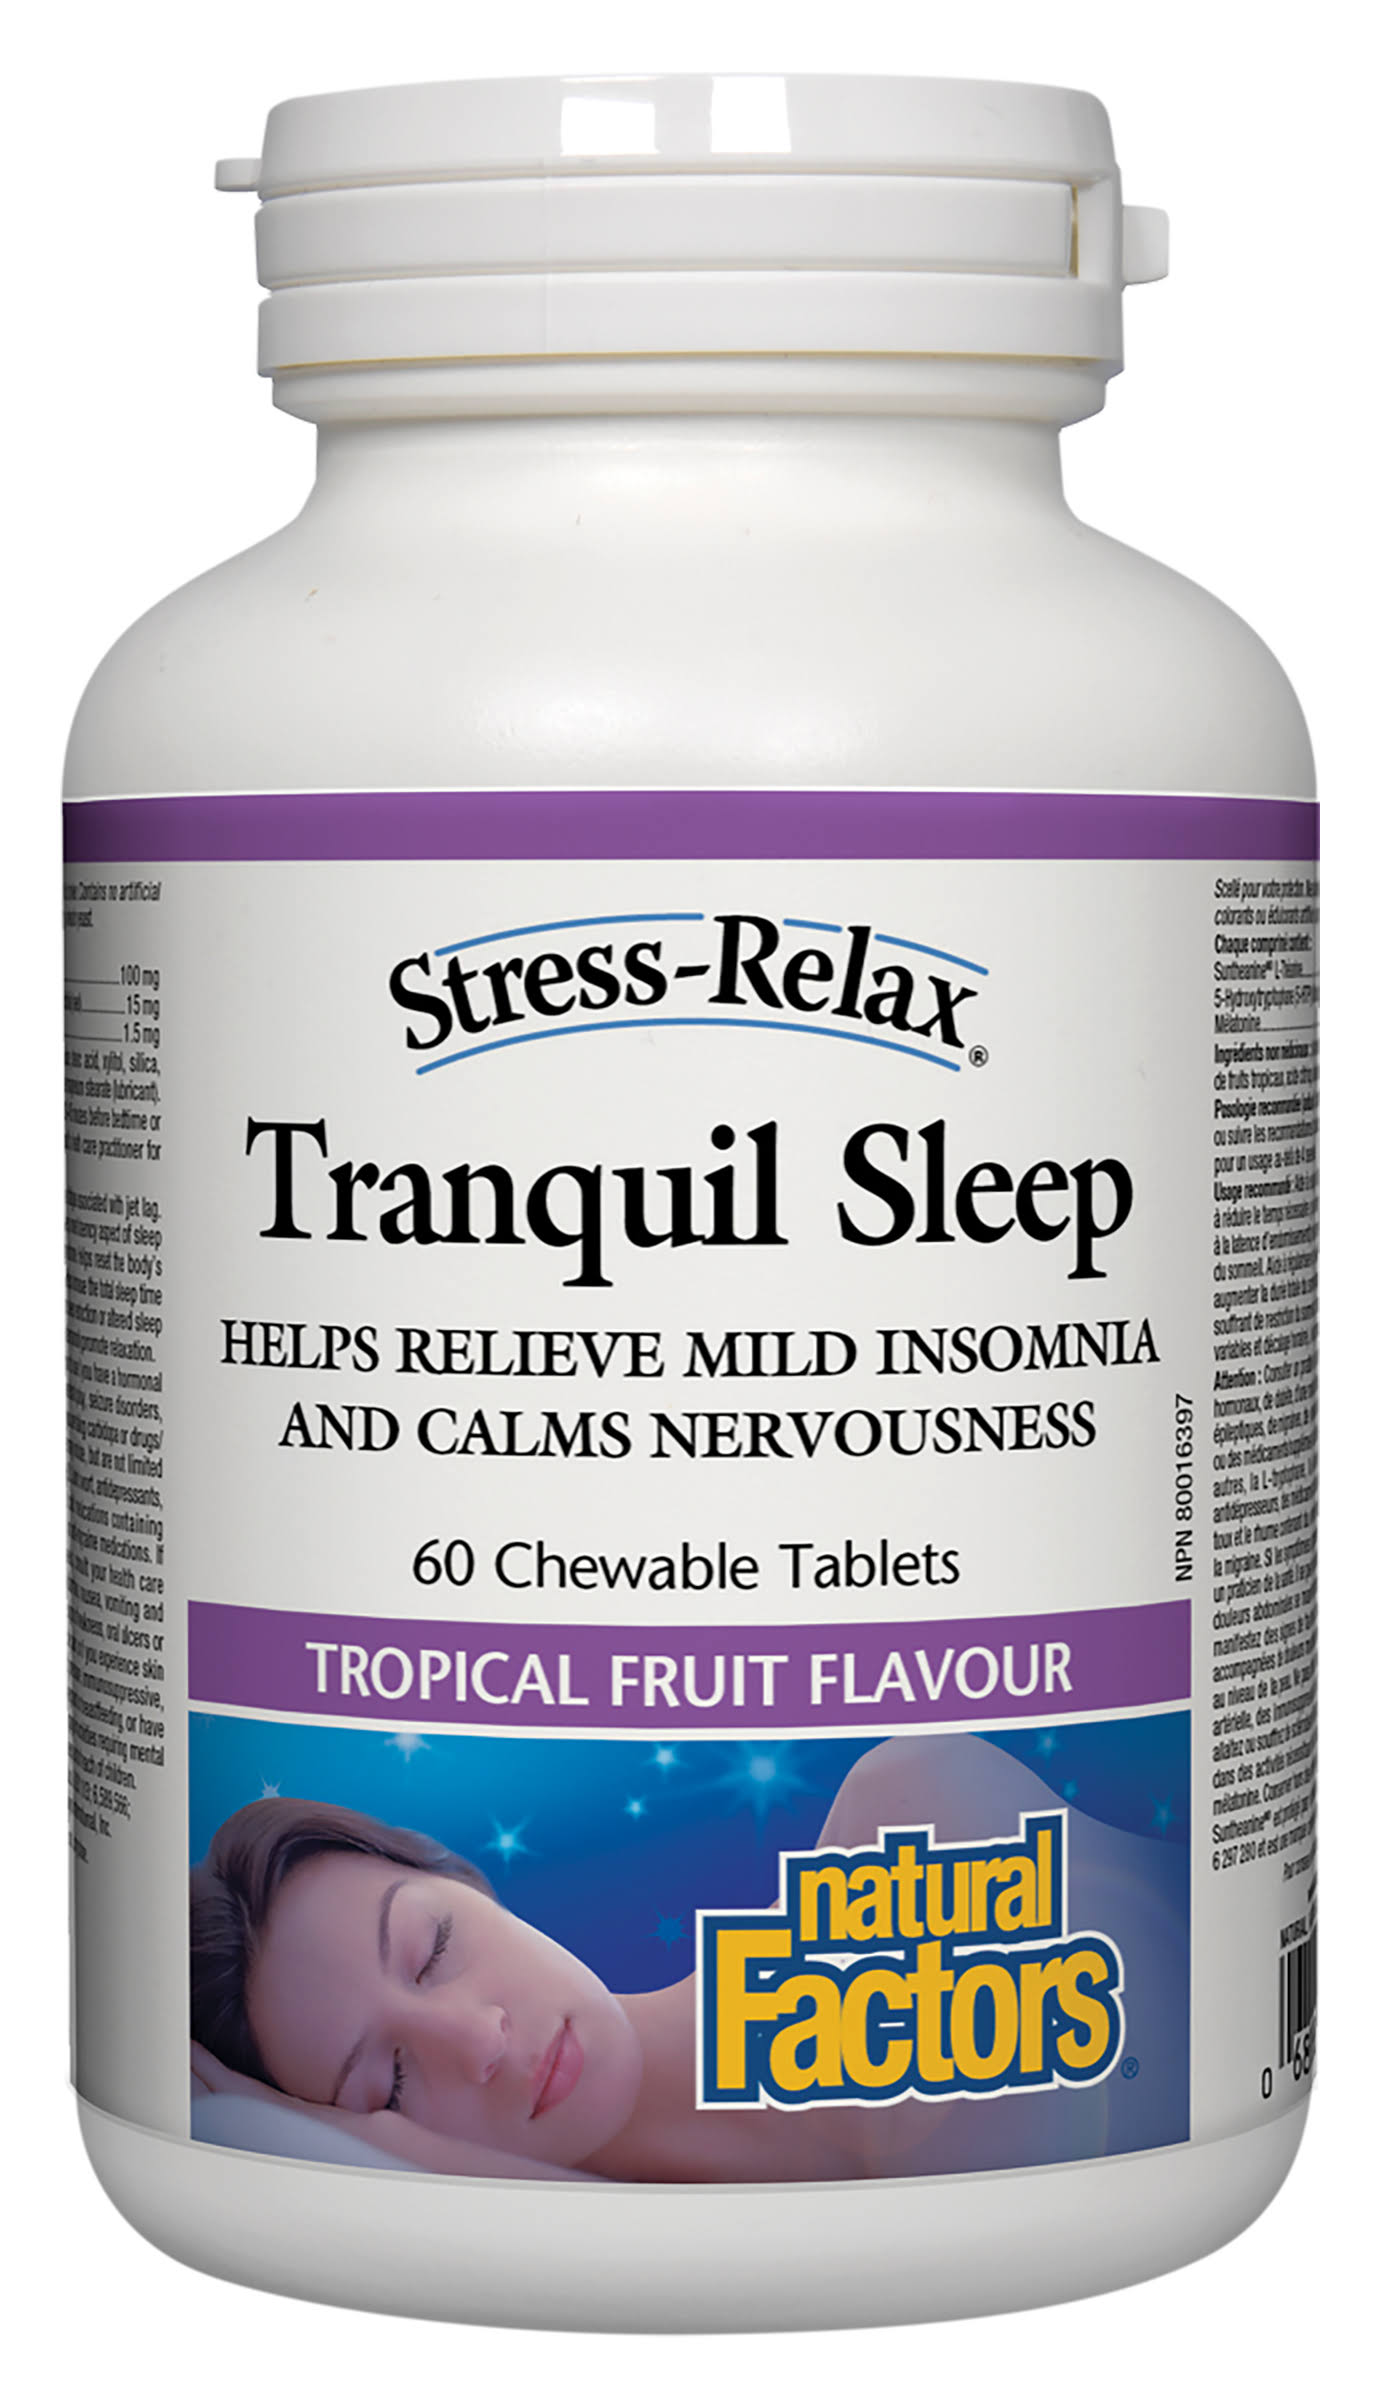 Natural Factors - Stress-Relax Tranquil Sleep - 60 Chewable Tablets